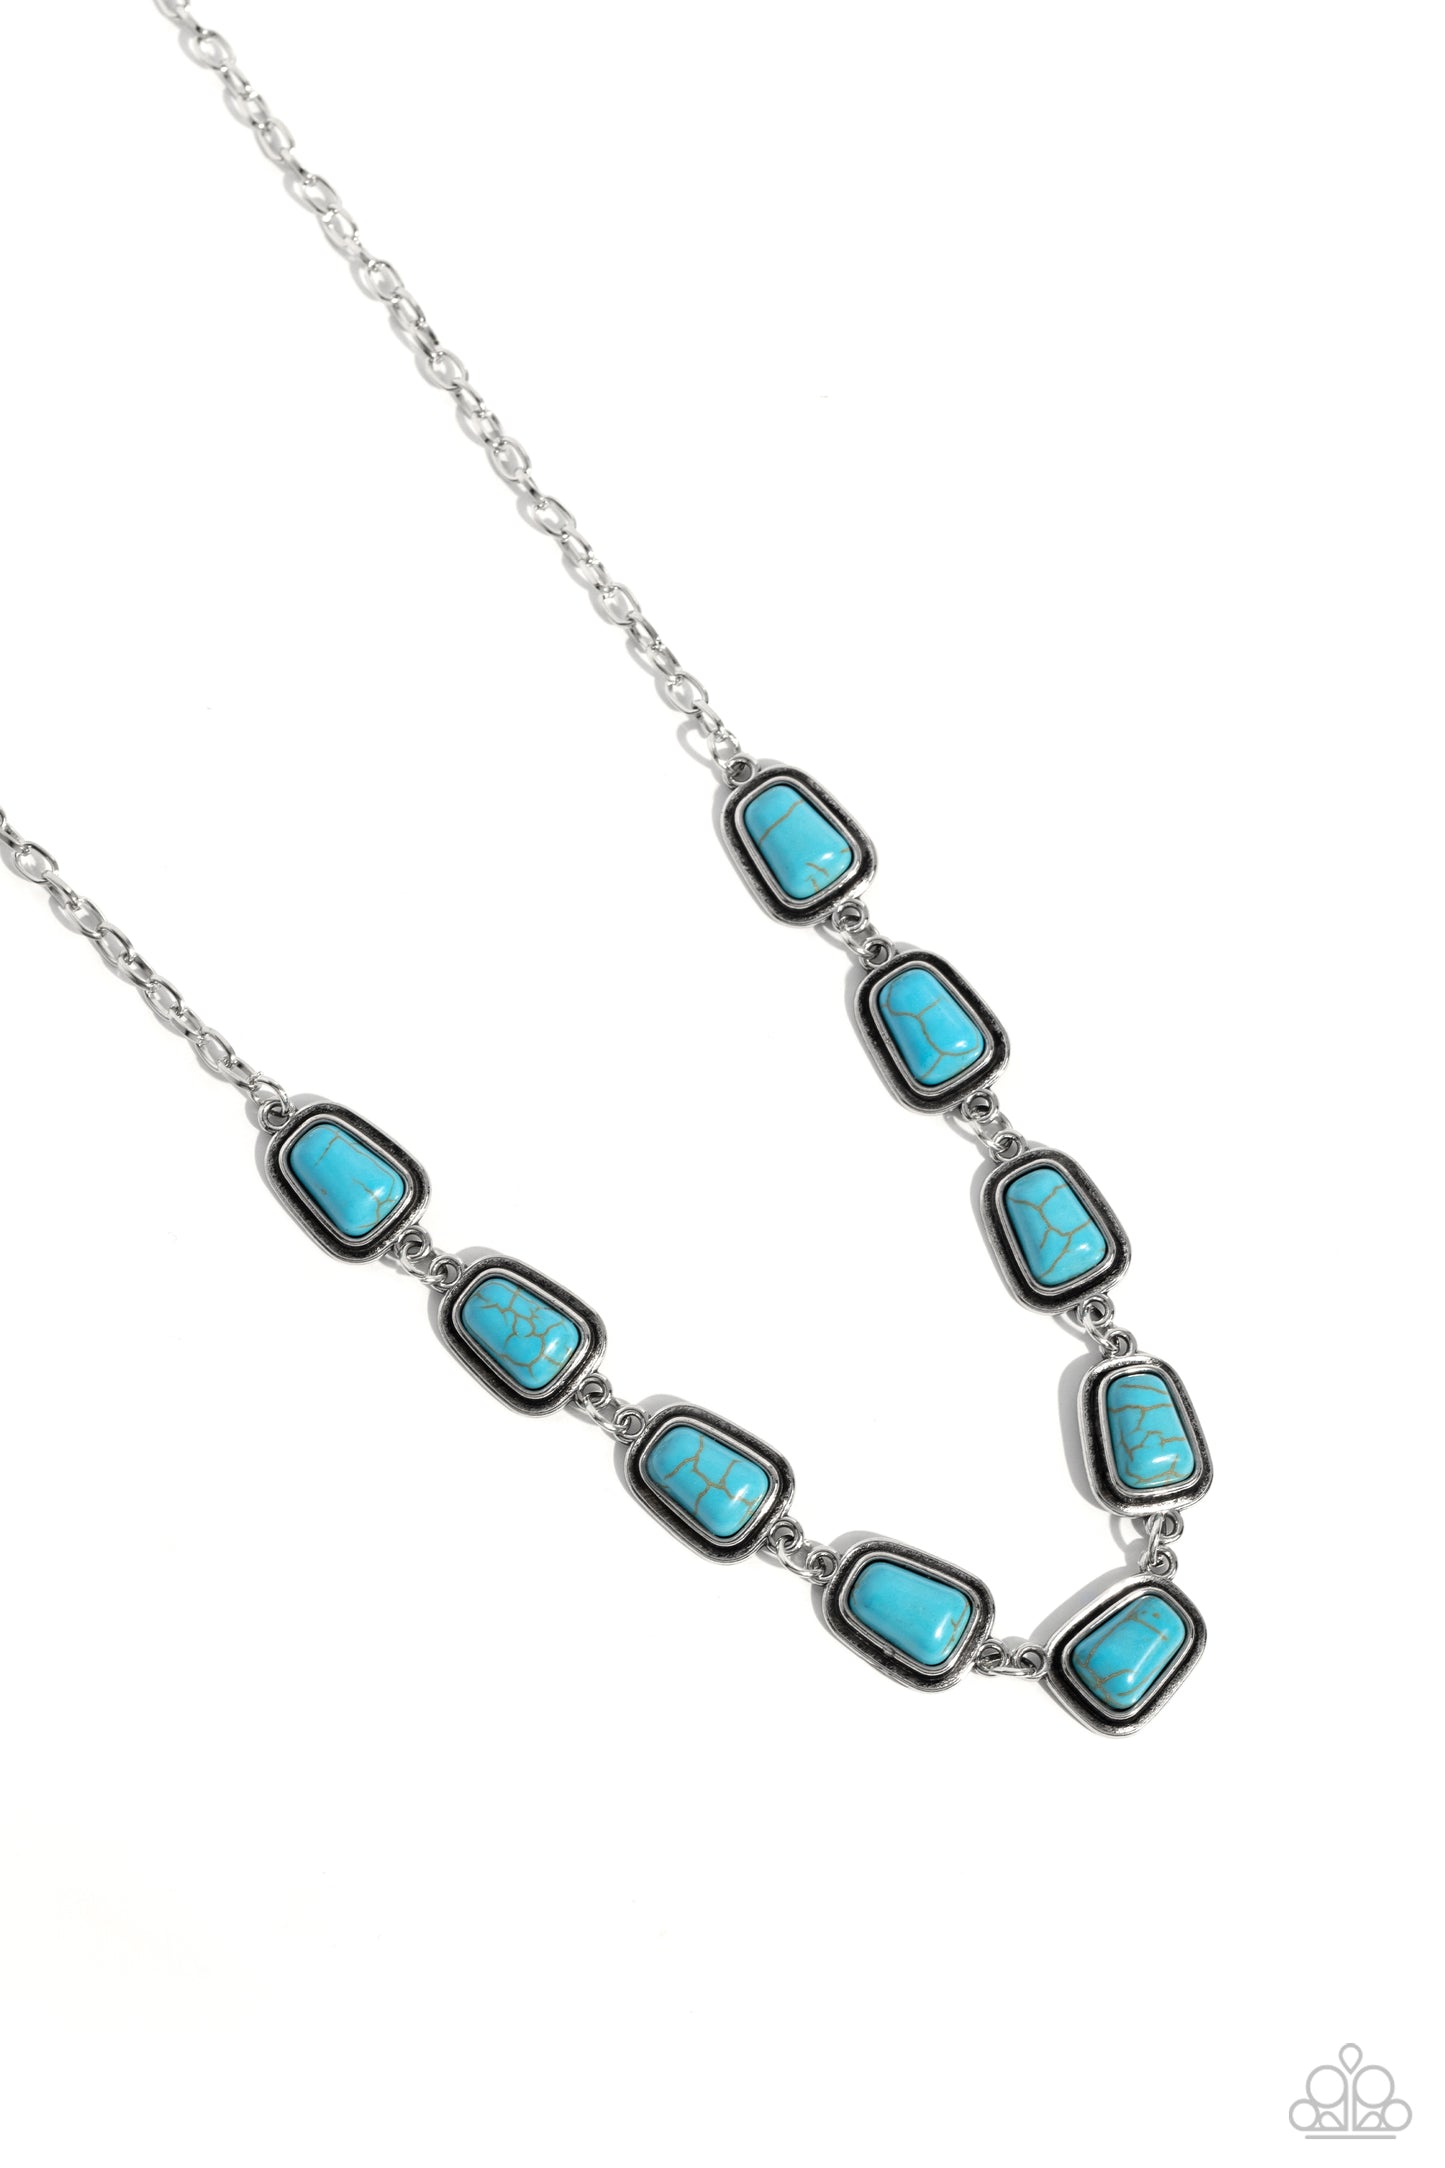 Southern Safari - Blue Turquoise Crackle Stone Silver Short Necklace